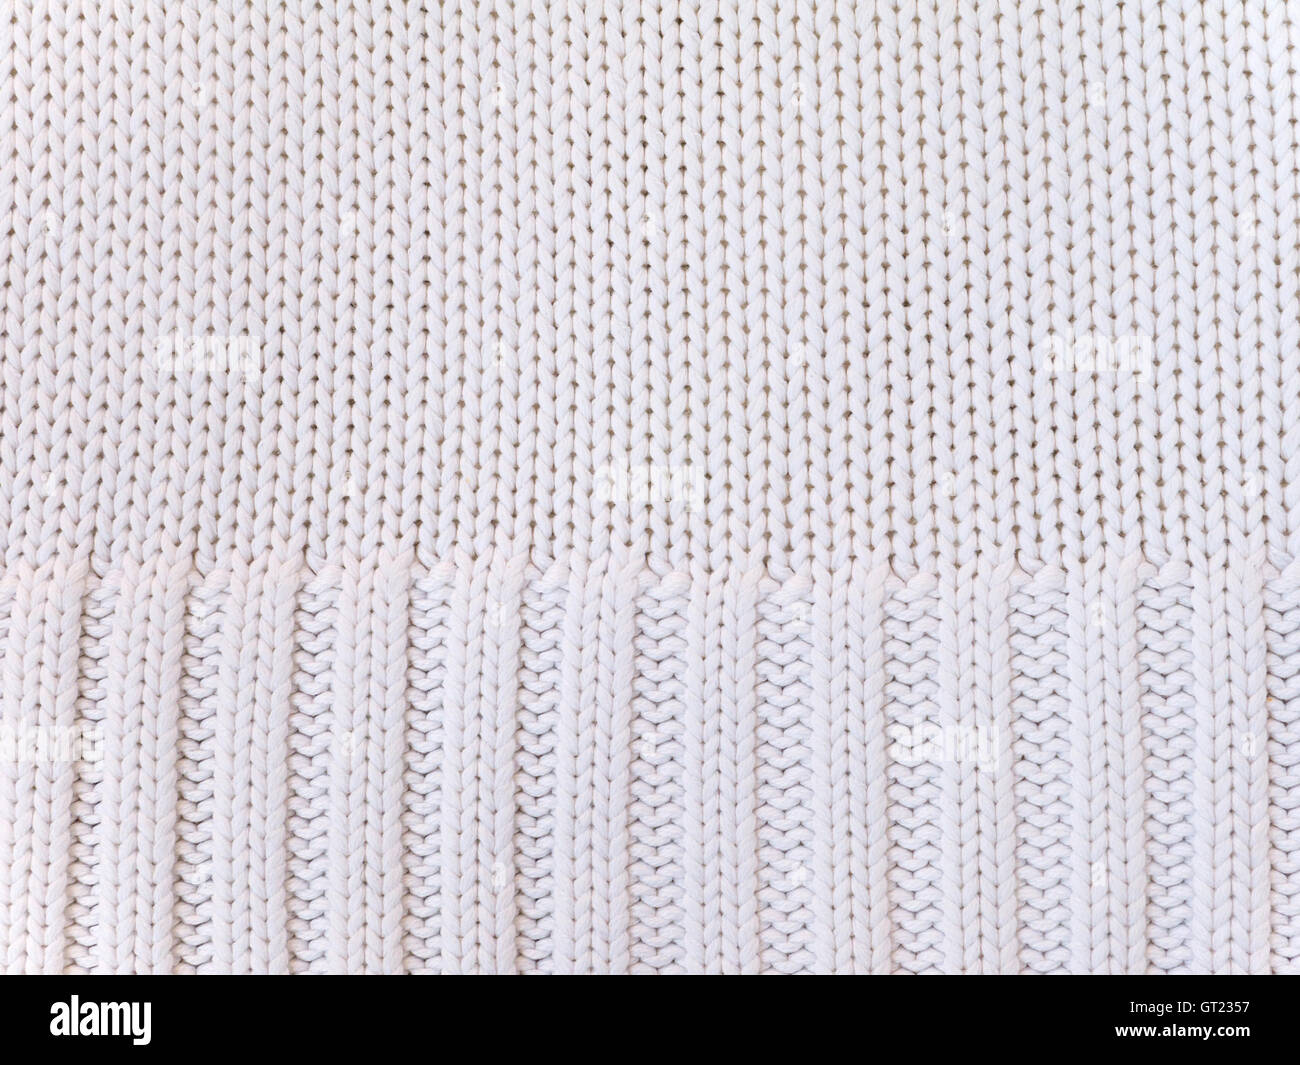 White knitted cotton fabric cool weather background Stock Photo